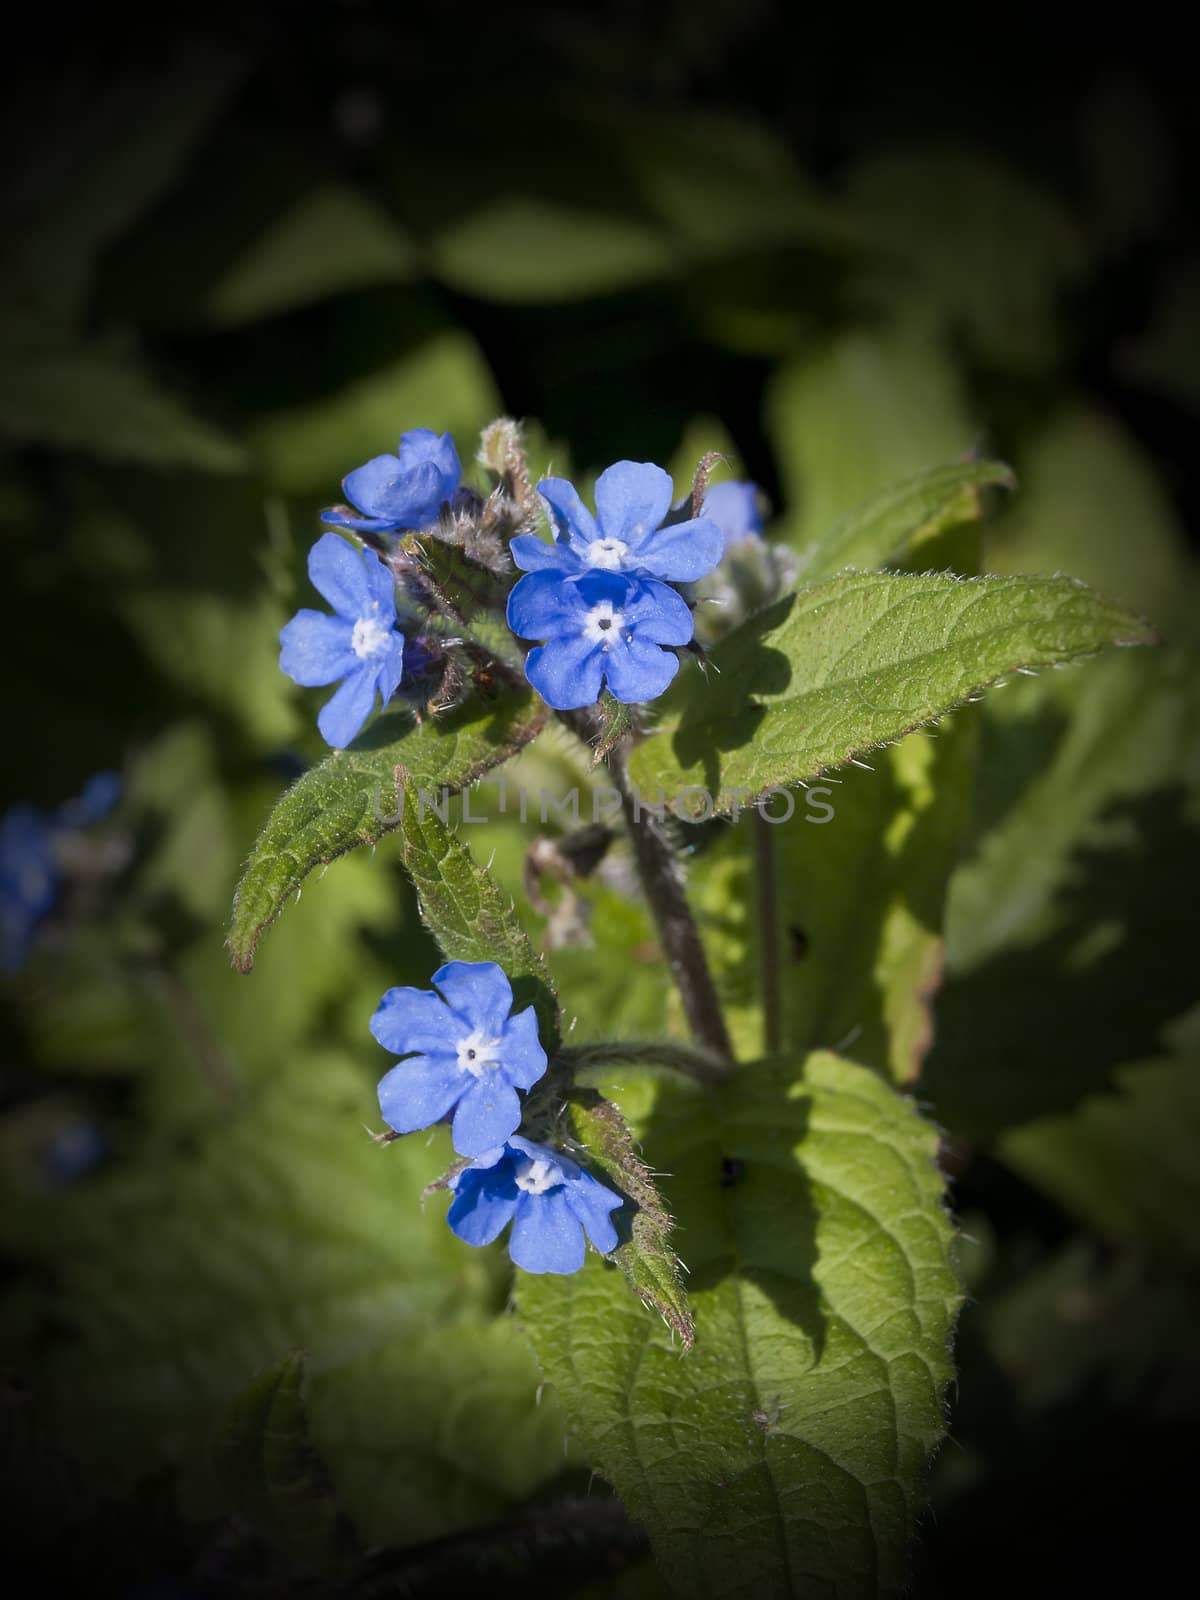 The lovely deep blue flowers of the Green Alkanet plant